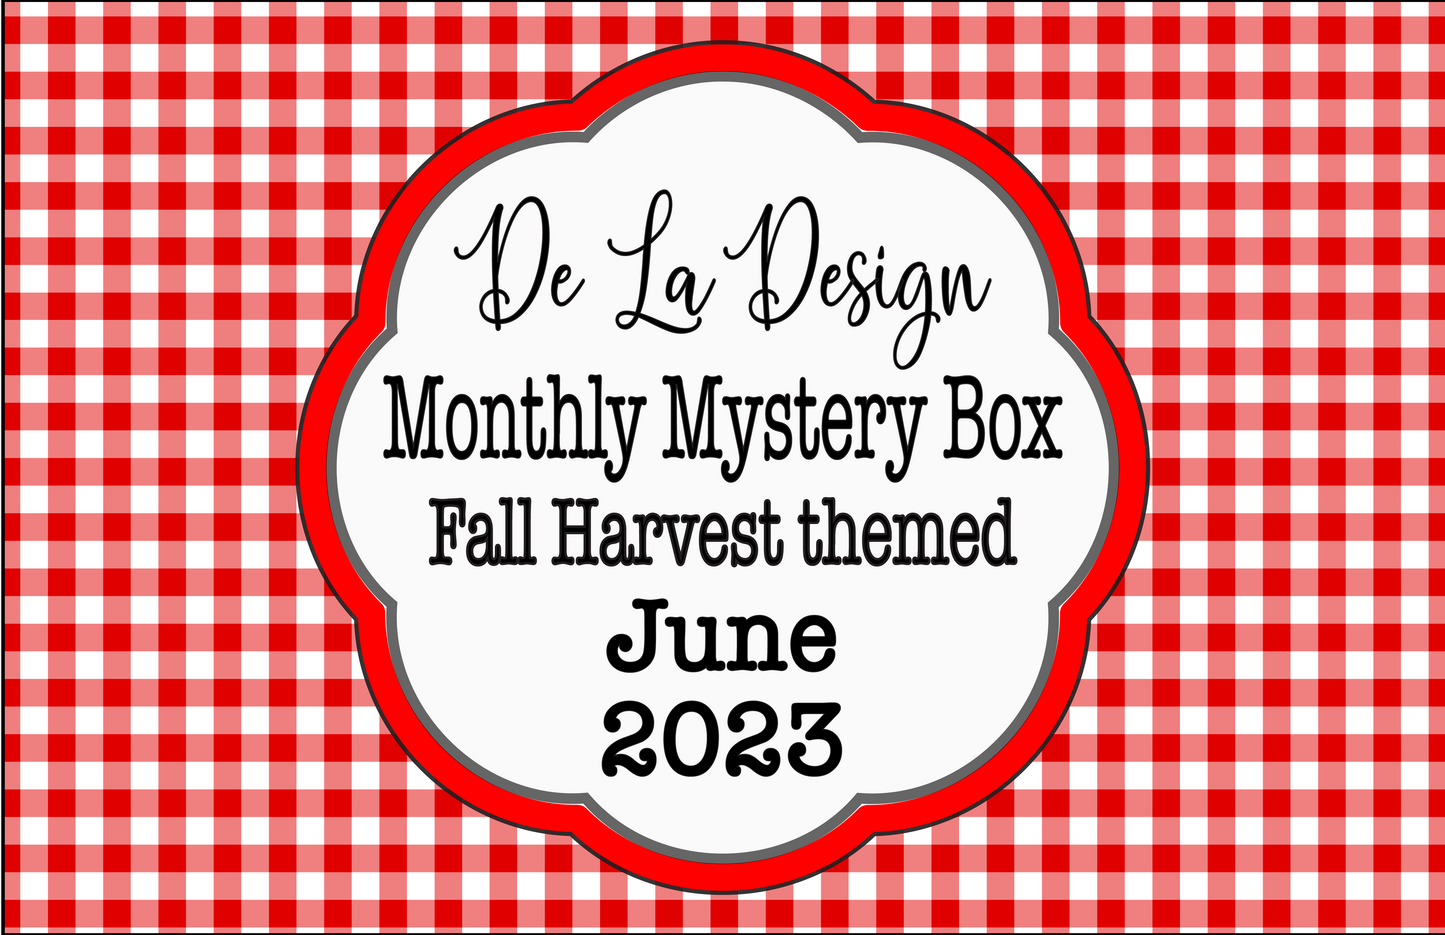 Monthly Mystery Box - June 2023 - Fall Harvest themed